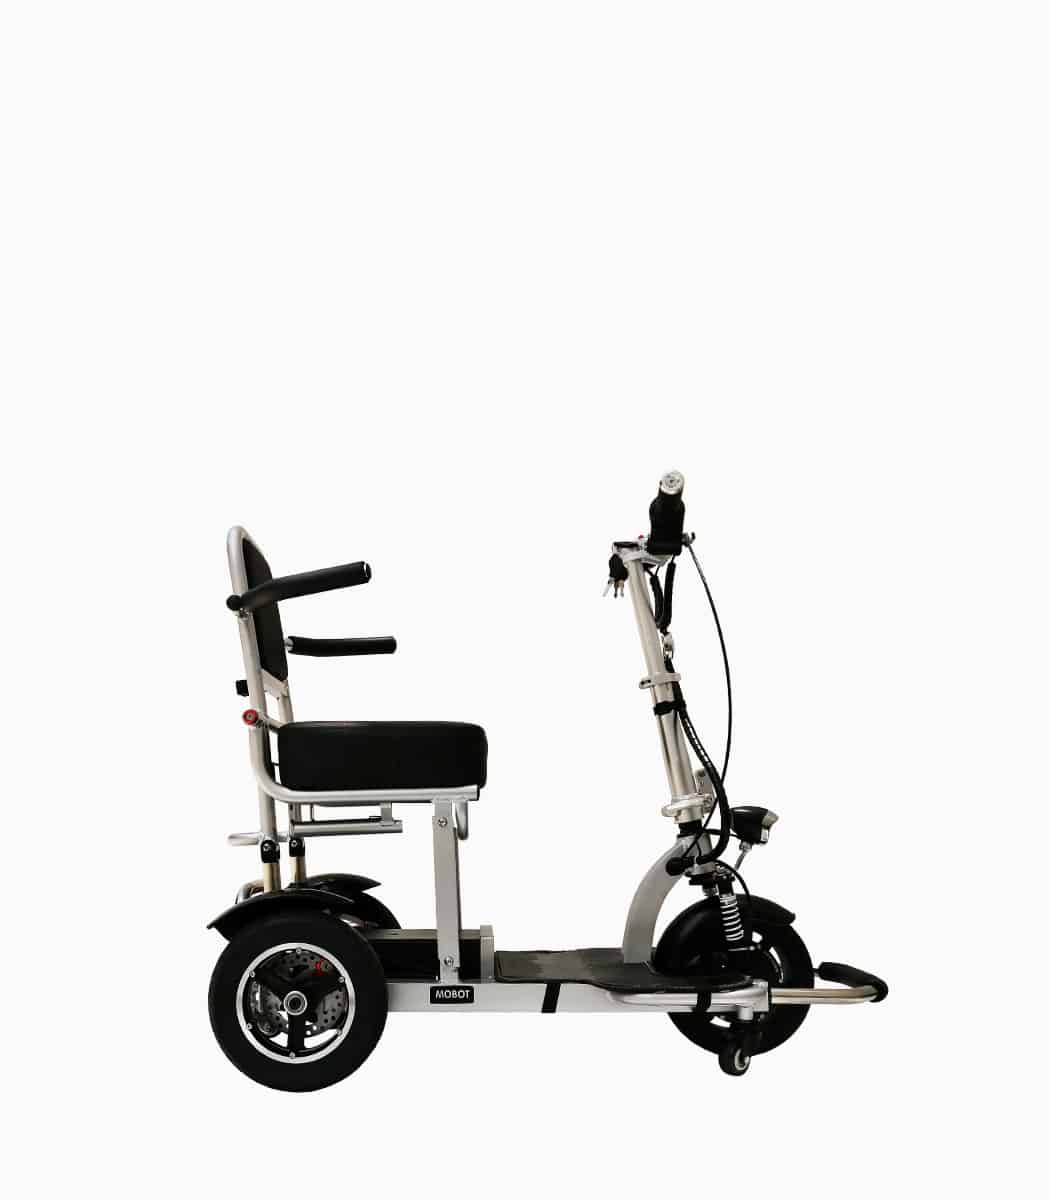 MOBOT FLEXI TITAN BLACK12AH 3 wheels mobility scooter right V1 - Home